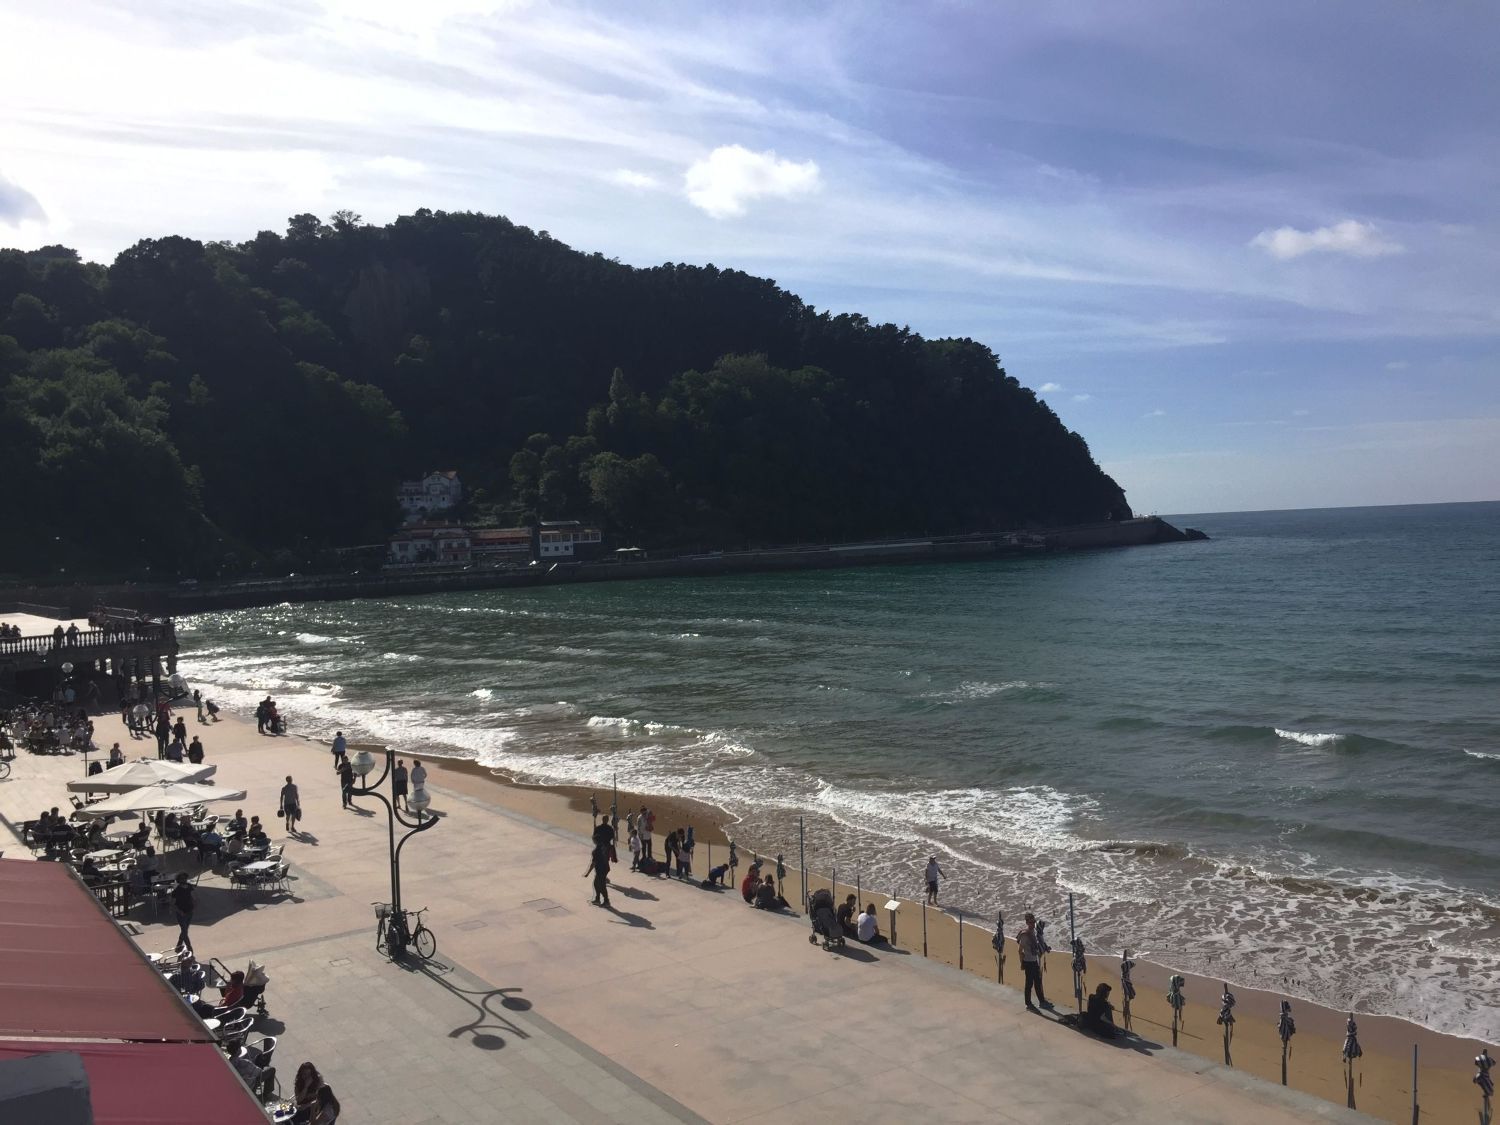 Apartment for sale on the seafront on Bixkonde street, in Zarauz